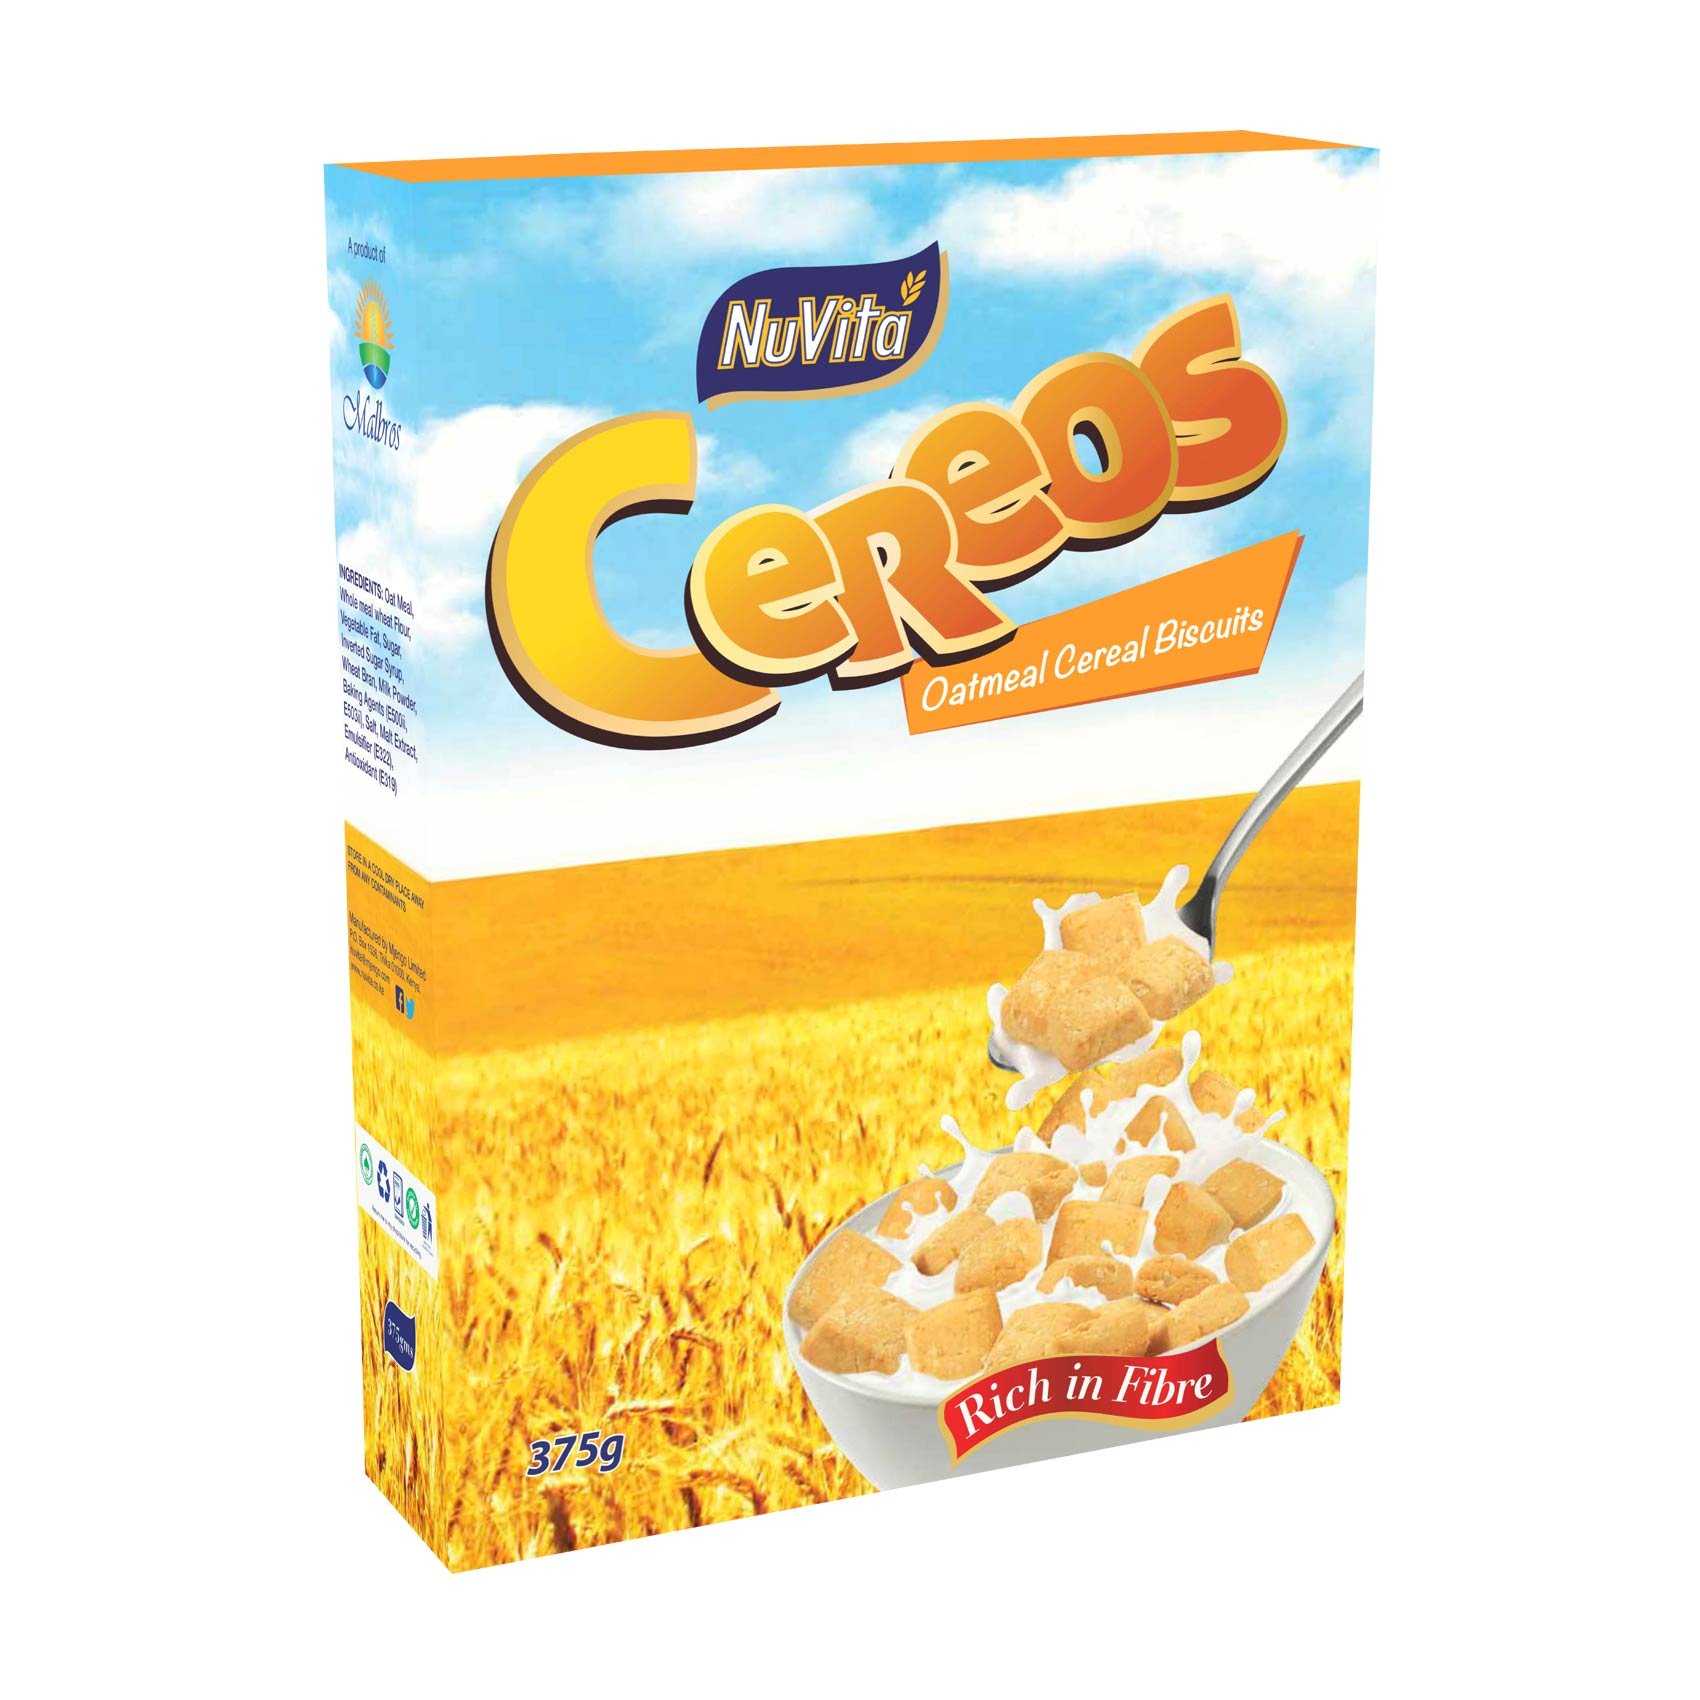 NuVita Cereos Oatmeal Cereal 375g